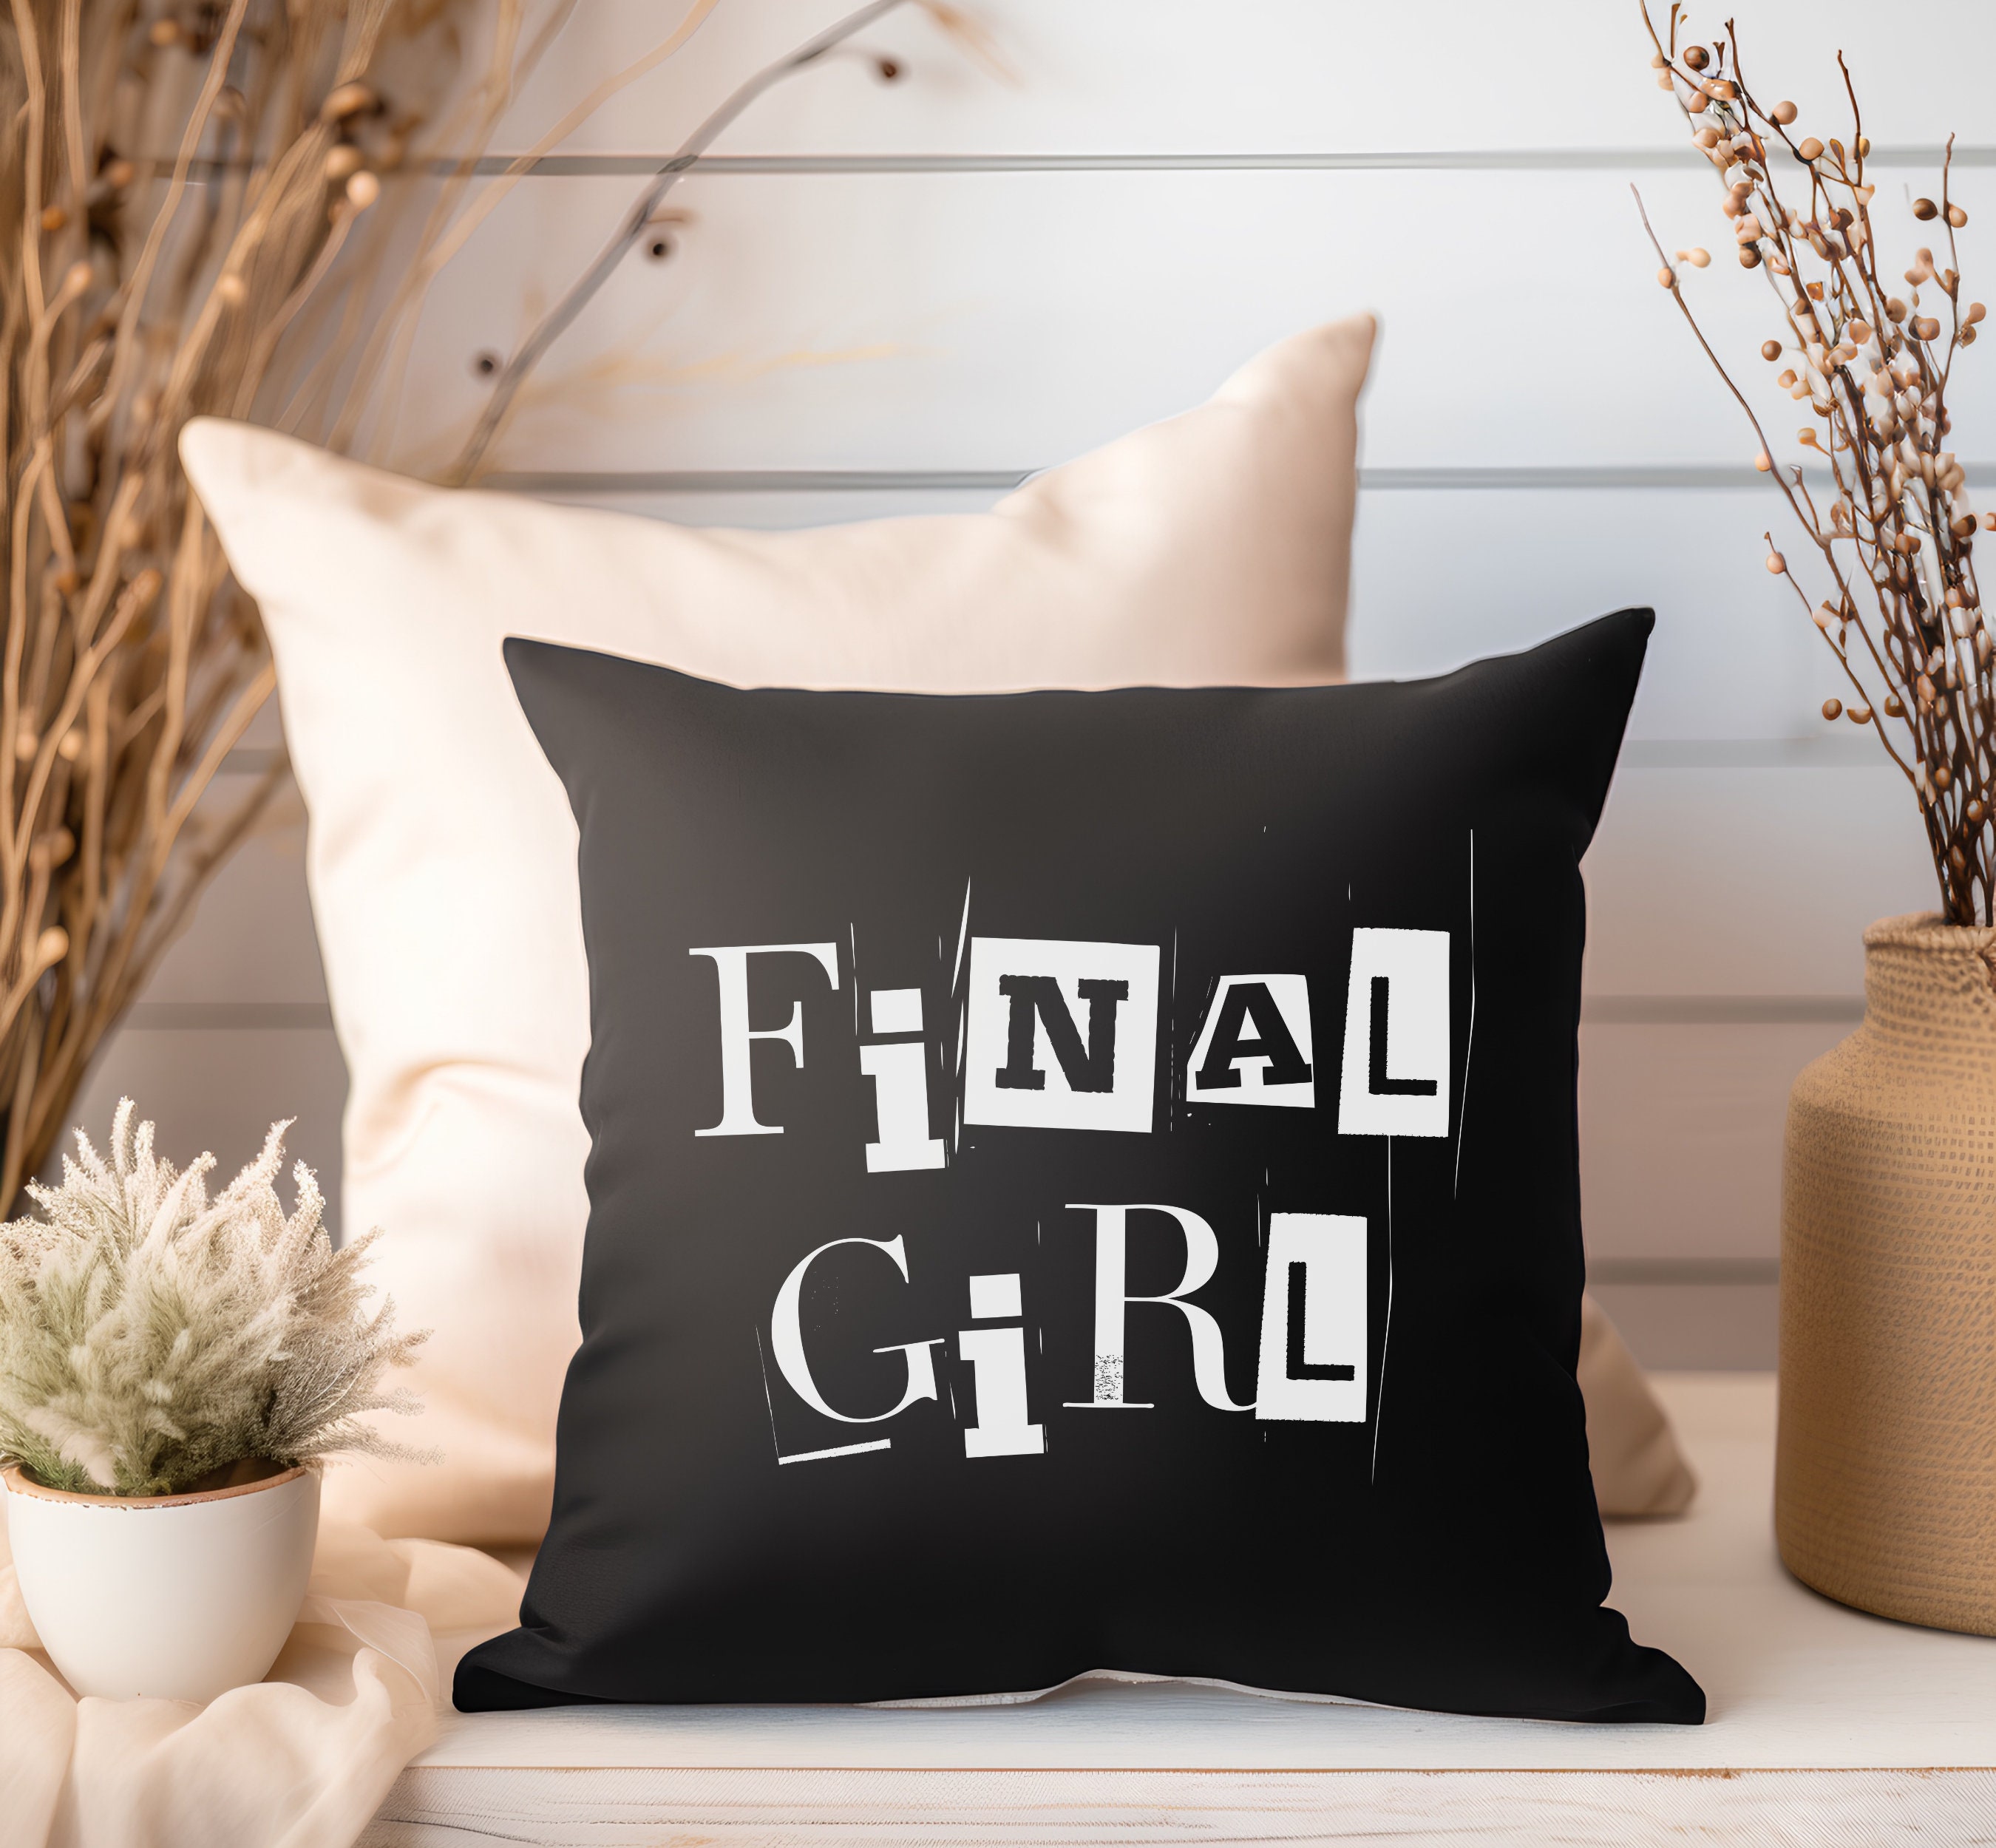 Ryan Gosling Sequin Pillow Celebrity Pillow Cushions Cool Pillow Case Funny  Gift Idea for Lars and the Real Girl Movie Fans 